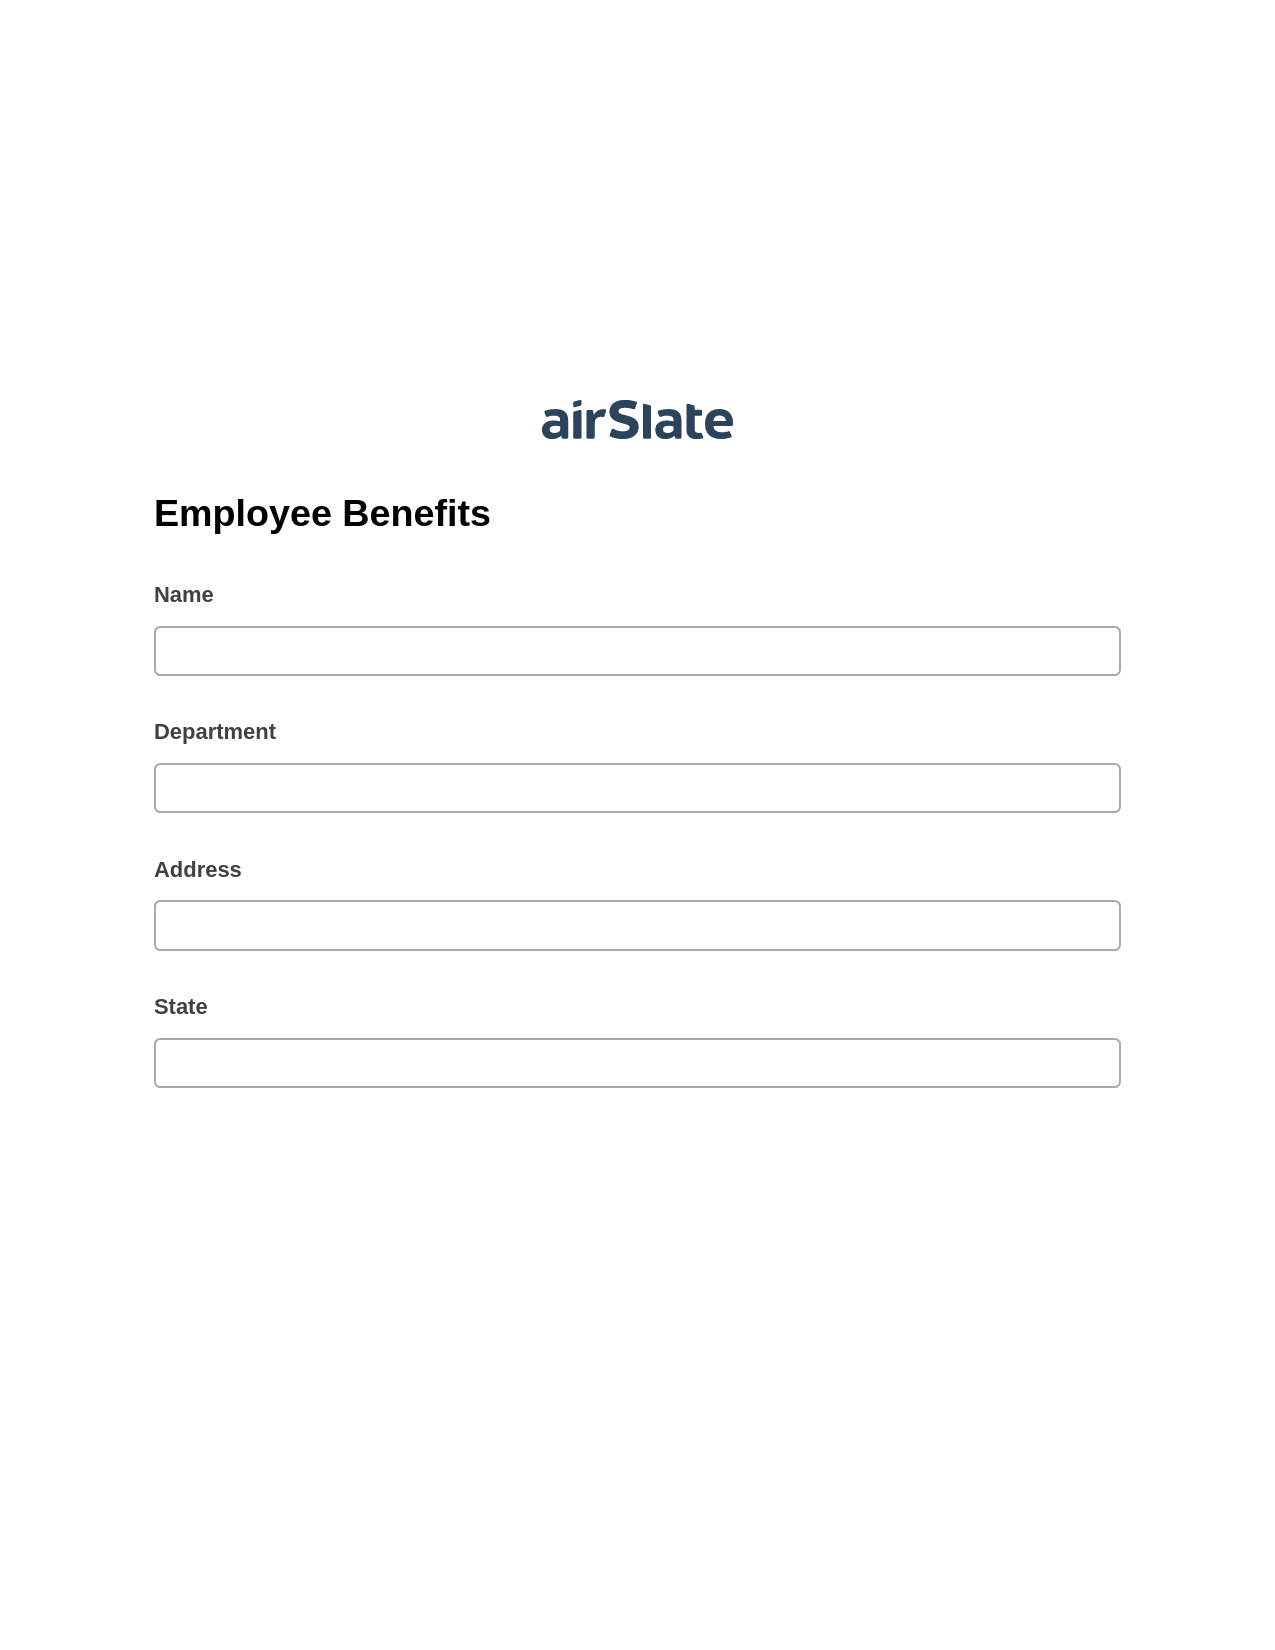 Multirole Employee Benefits Pre-fill Slate from MS Dynamics 365 Records Bot, Document Hide Bot, Export to NetSuite Record Bot